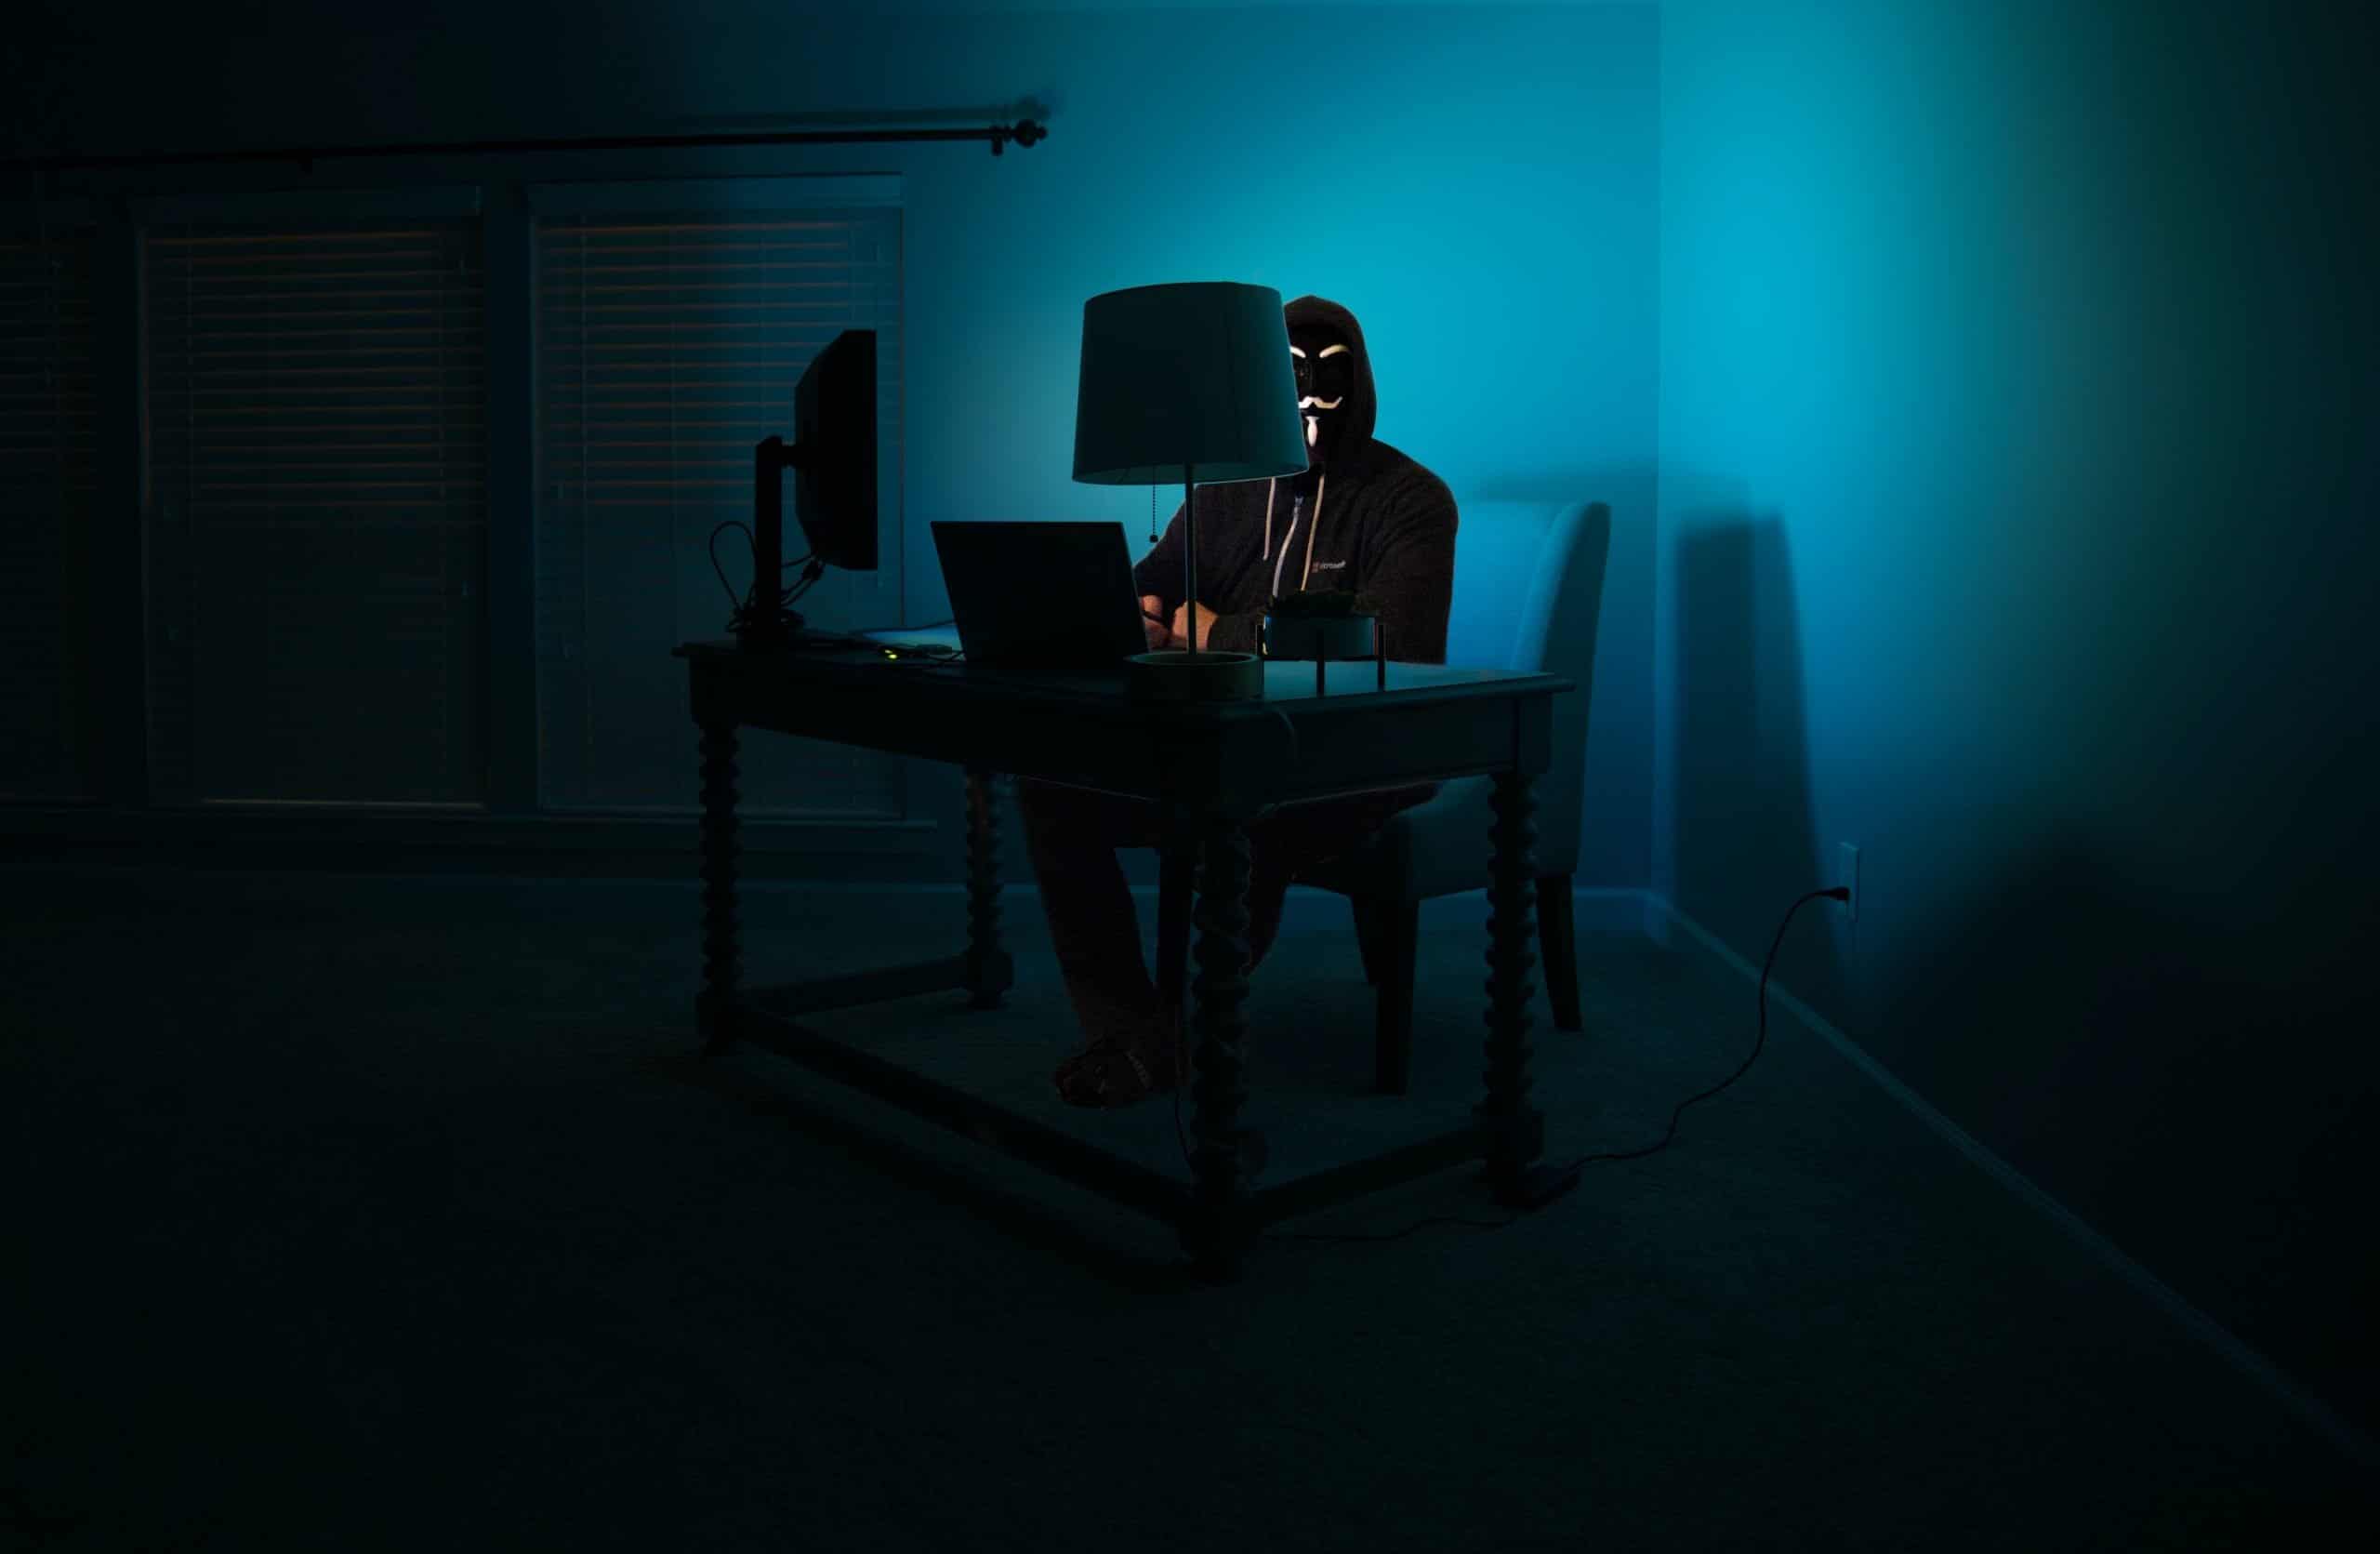 The picture shows a hacker in a dim lit room